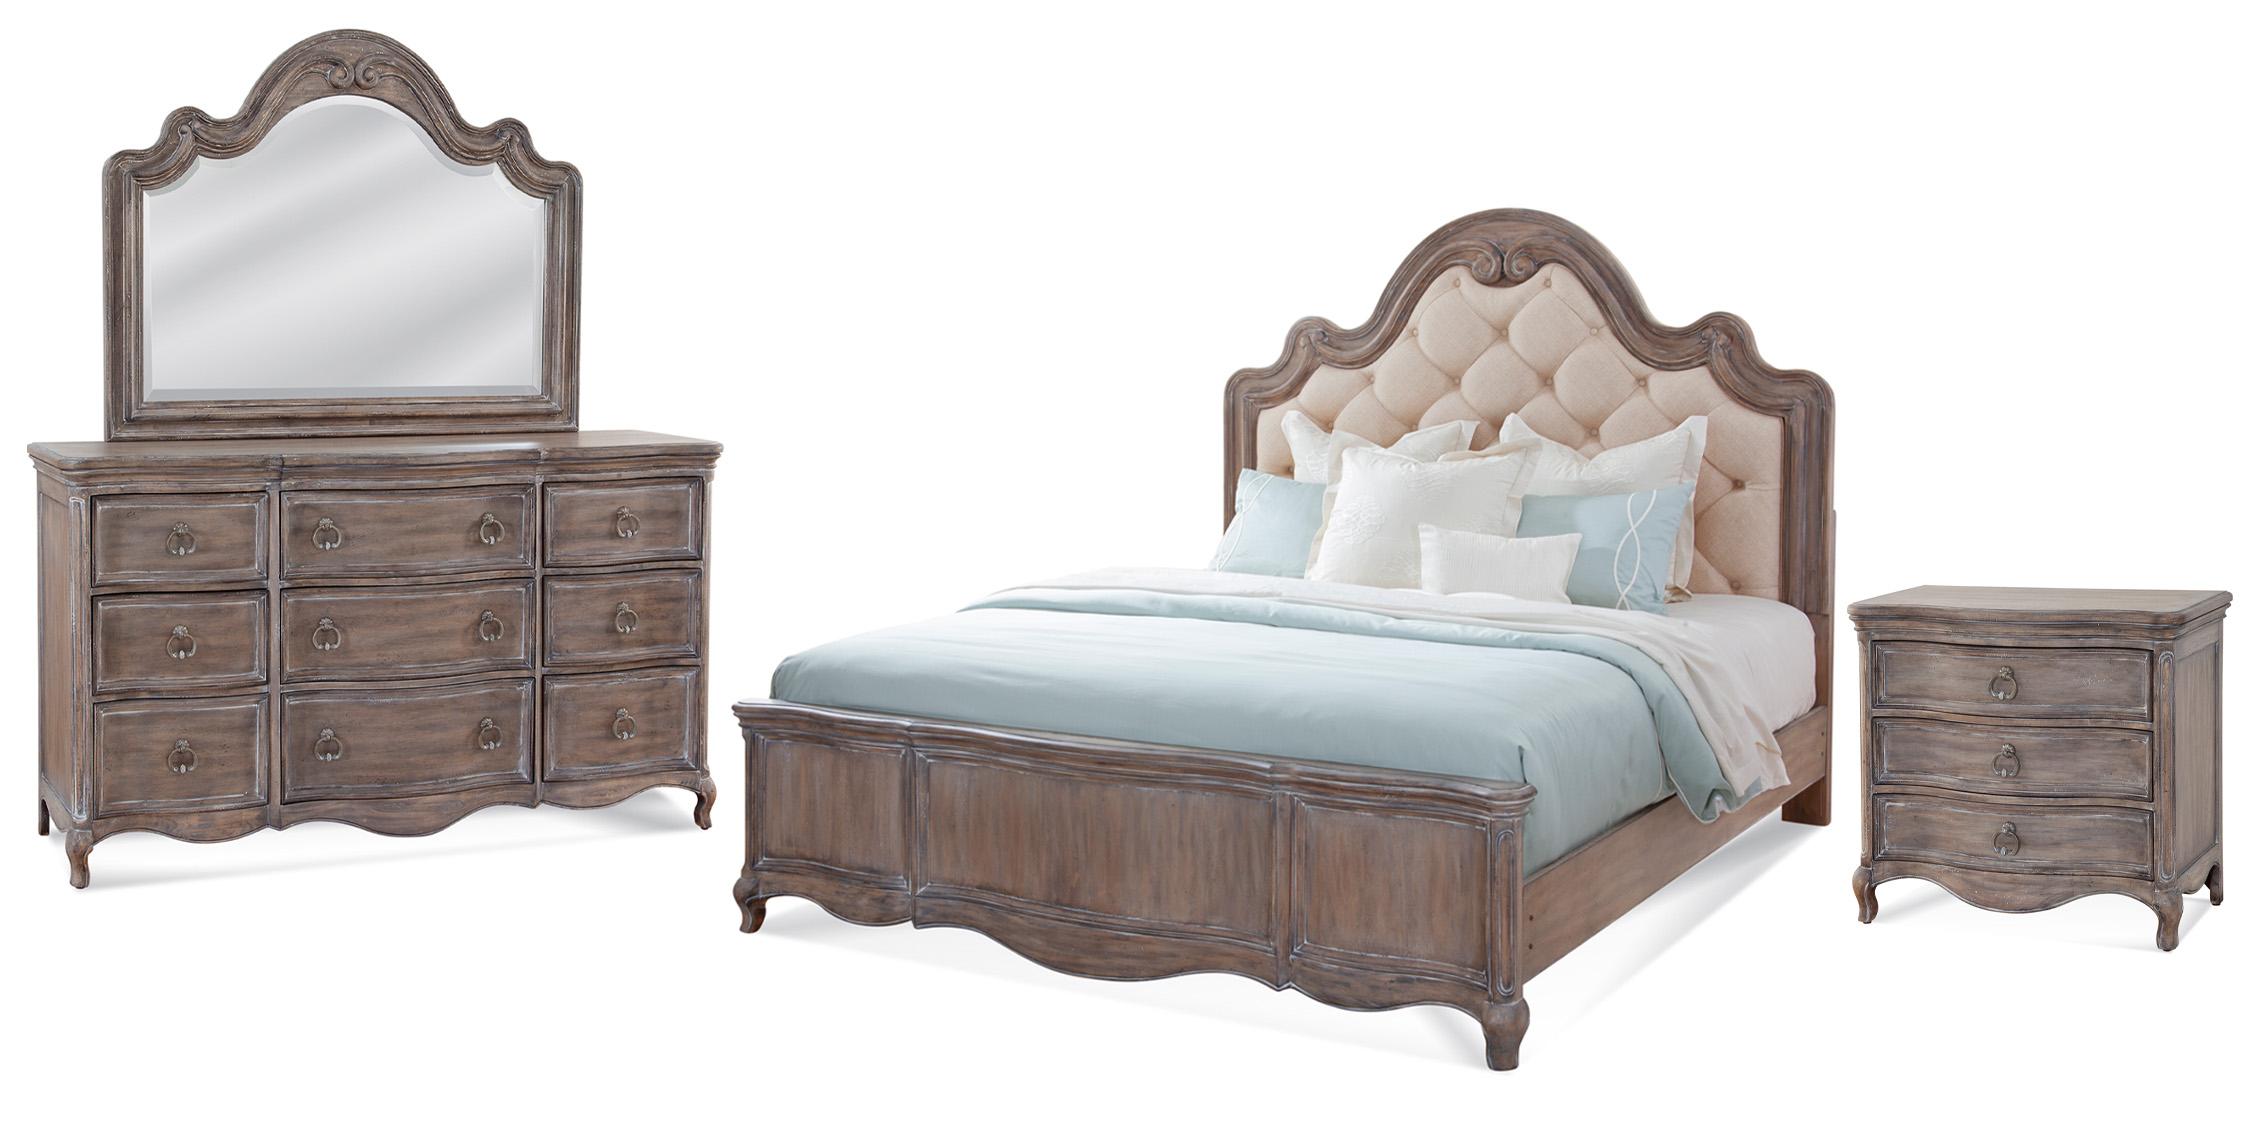 Classic, Traditional Panel Bedroom Set GENOA 1575-50TUPH 1575-QTUPN-4PC in Antique, Gray Fabric